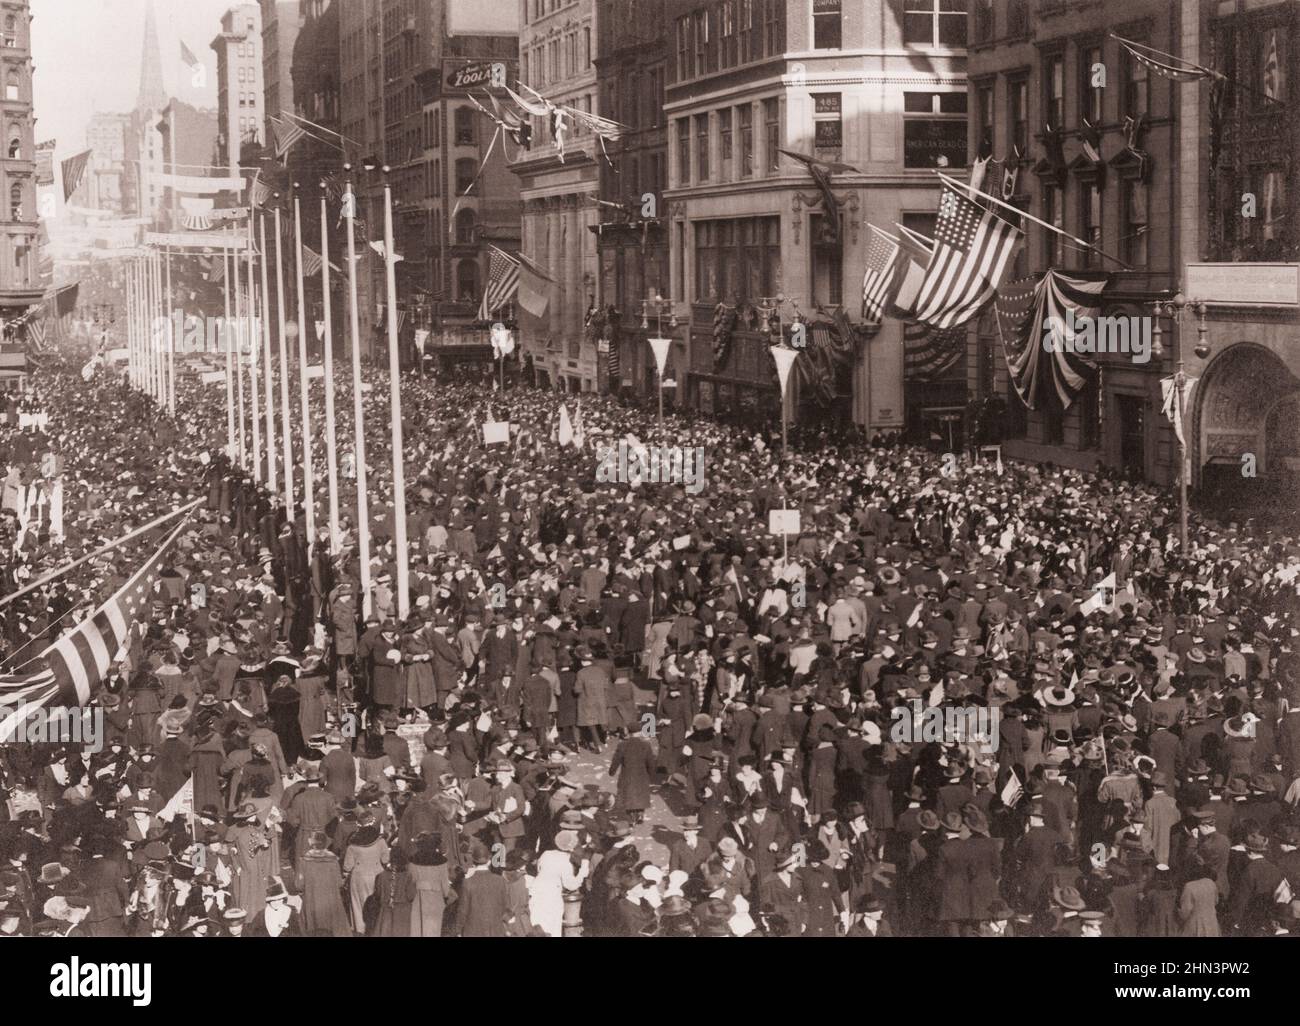 Armistice Day in New York City. Crowd in front of Public Library, day of signing of armistice. USA. November 11, 1918 Stock Photo